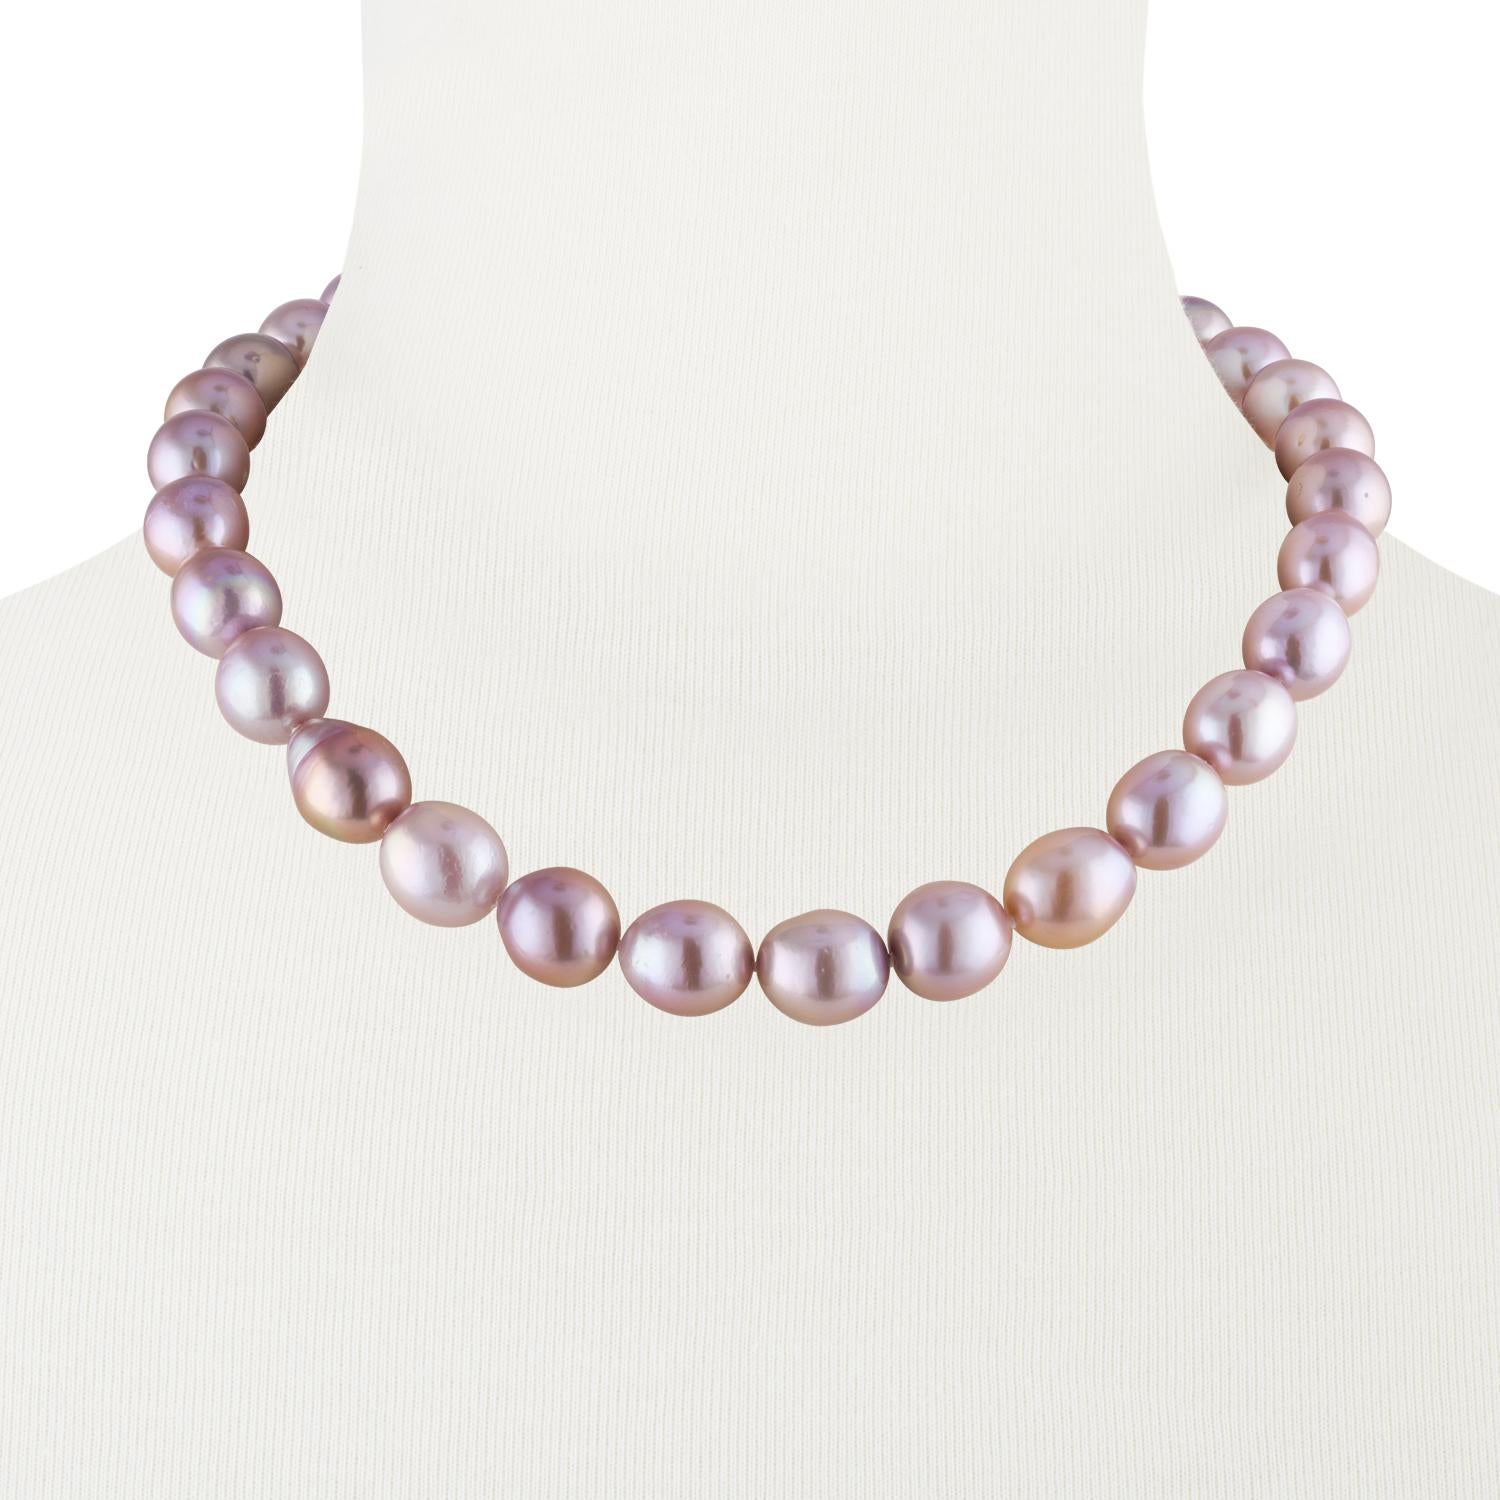 This Chinese Freshwater natural pink baroque cultured pearl necklace features fine quality, high luster pearls measuring 13x14mm.
This choker length necklace is strung with a 14 karat white gold 12mm corrugated ball clasp and is 18 inches in length.